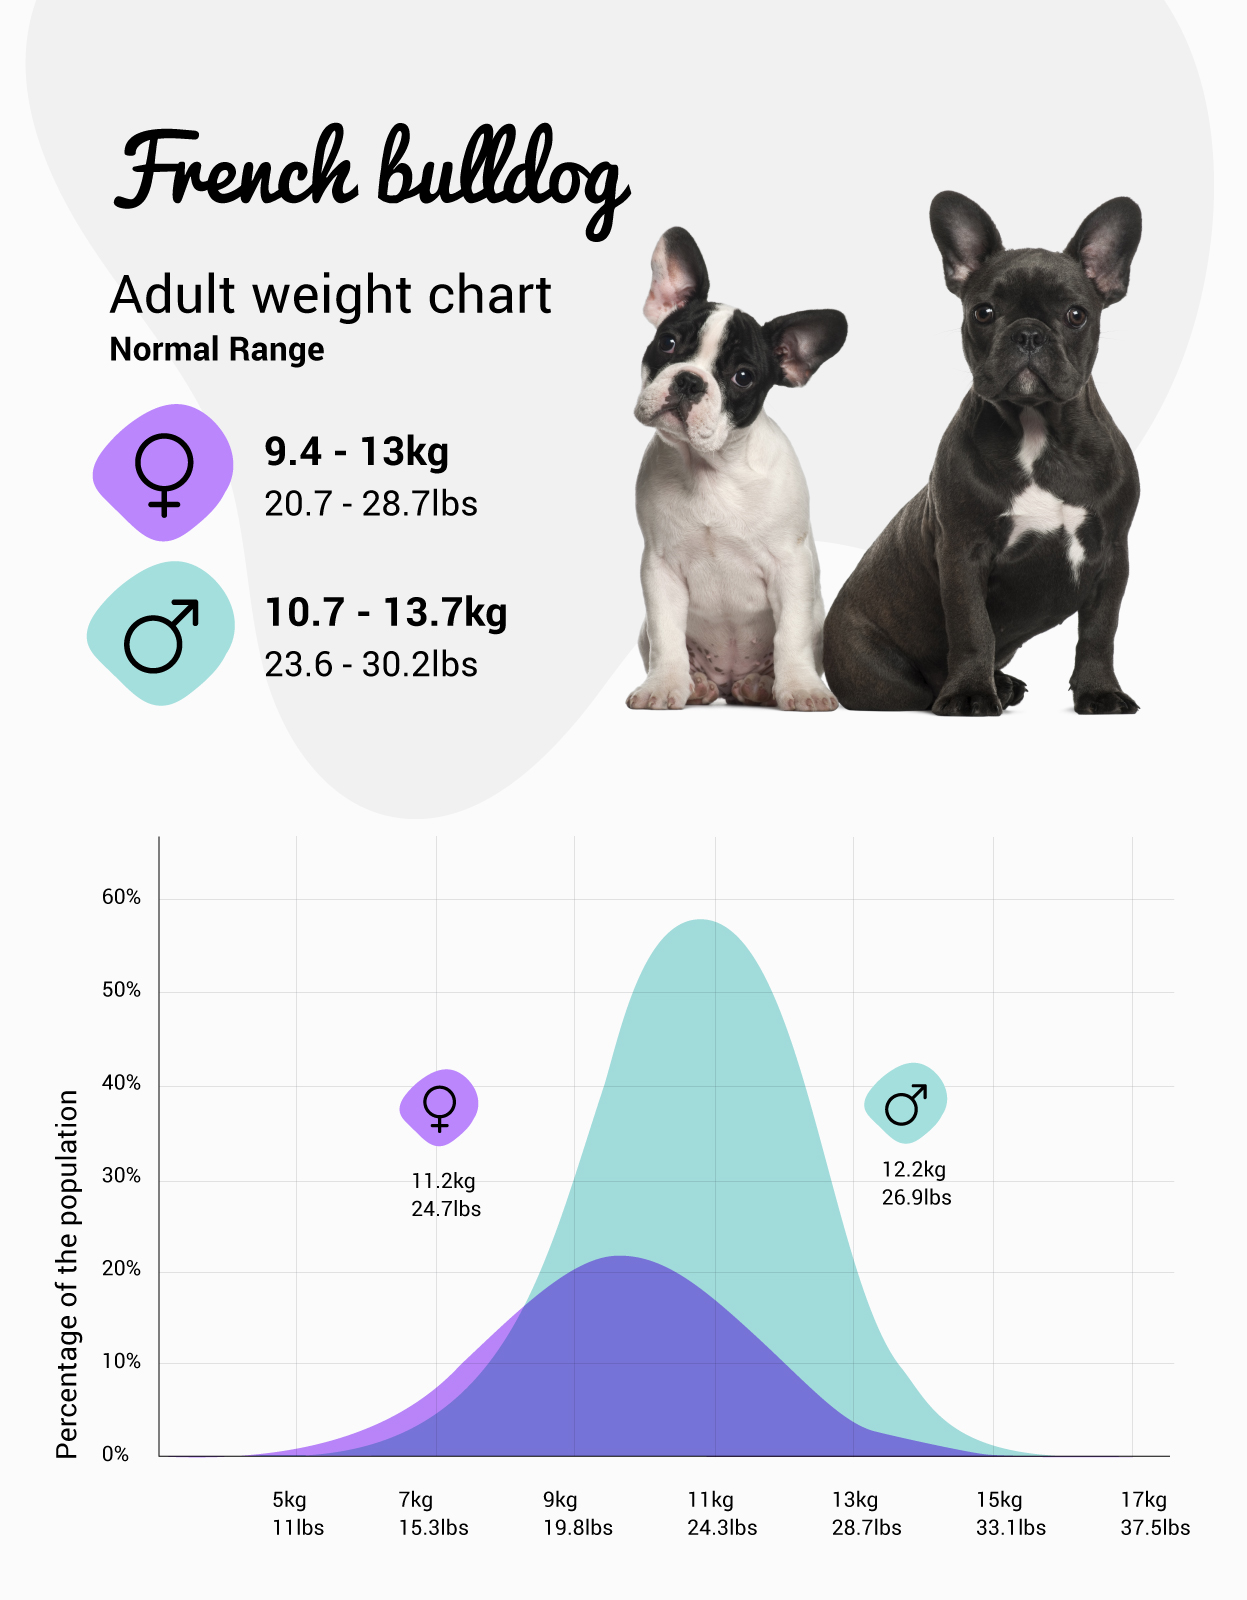 how heavy are french bulldogs in kg?